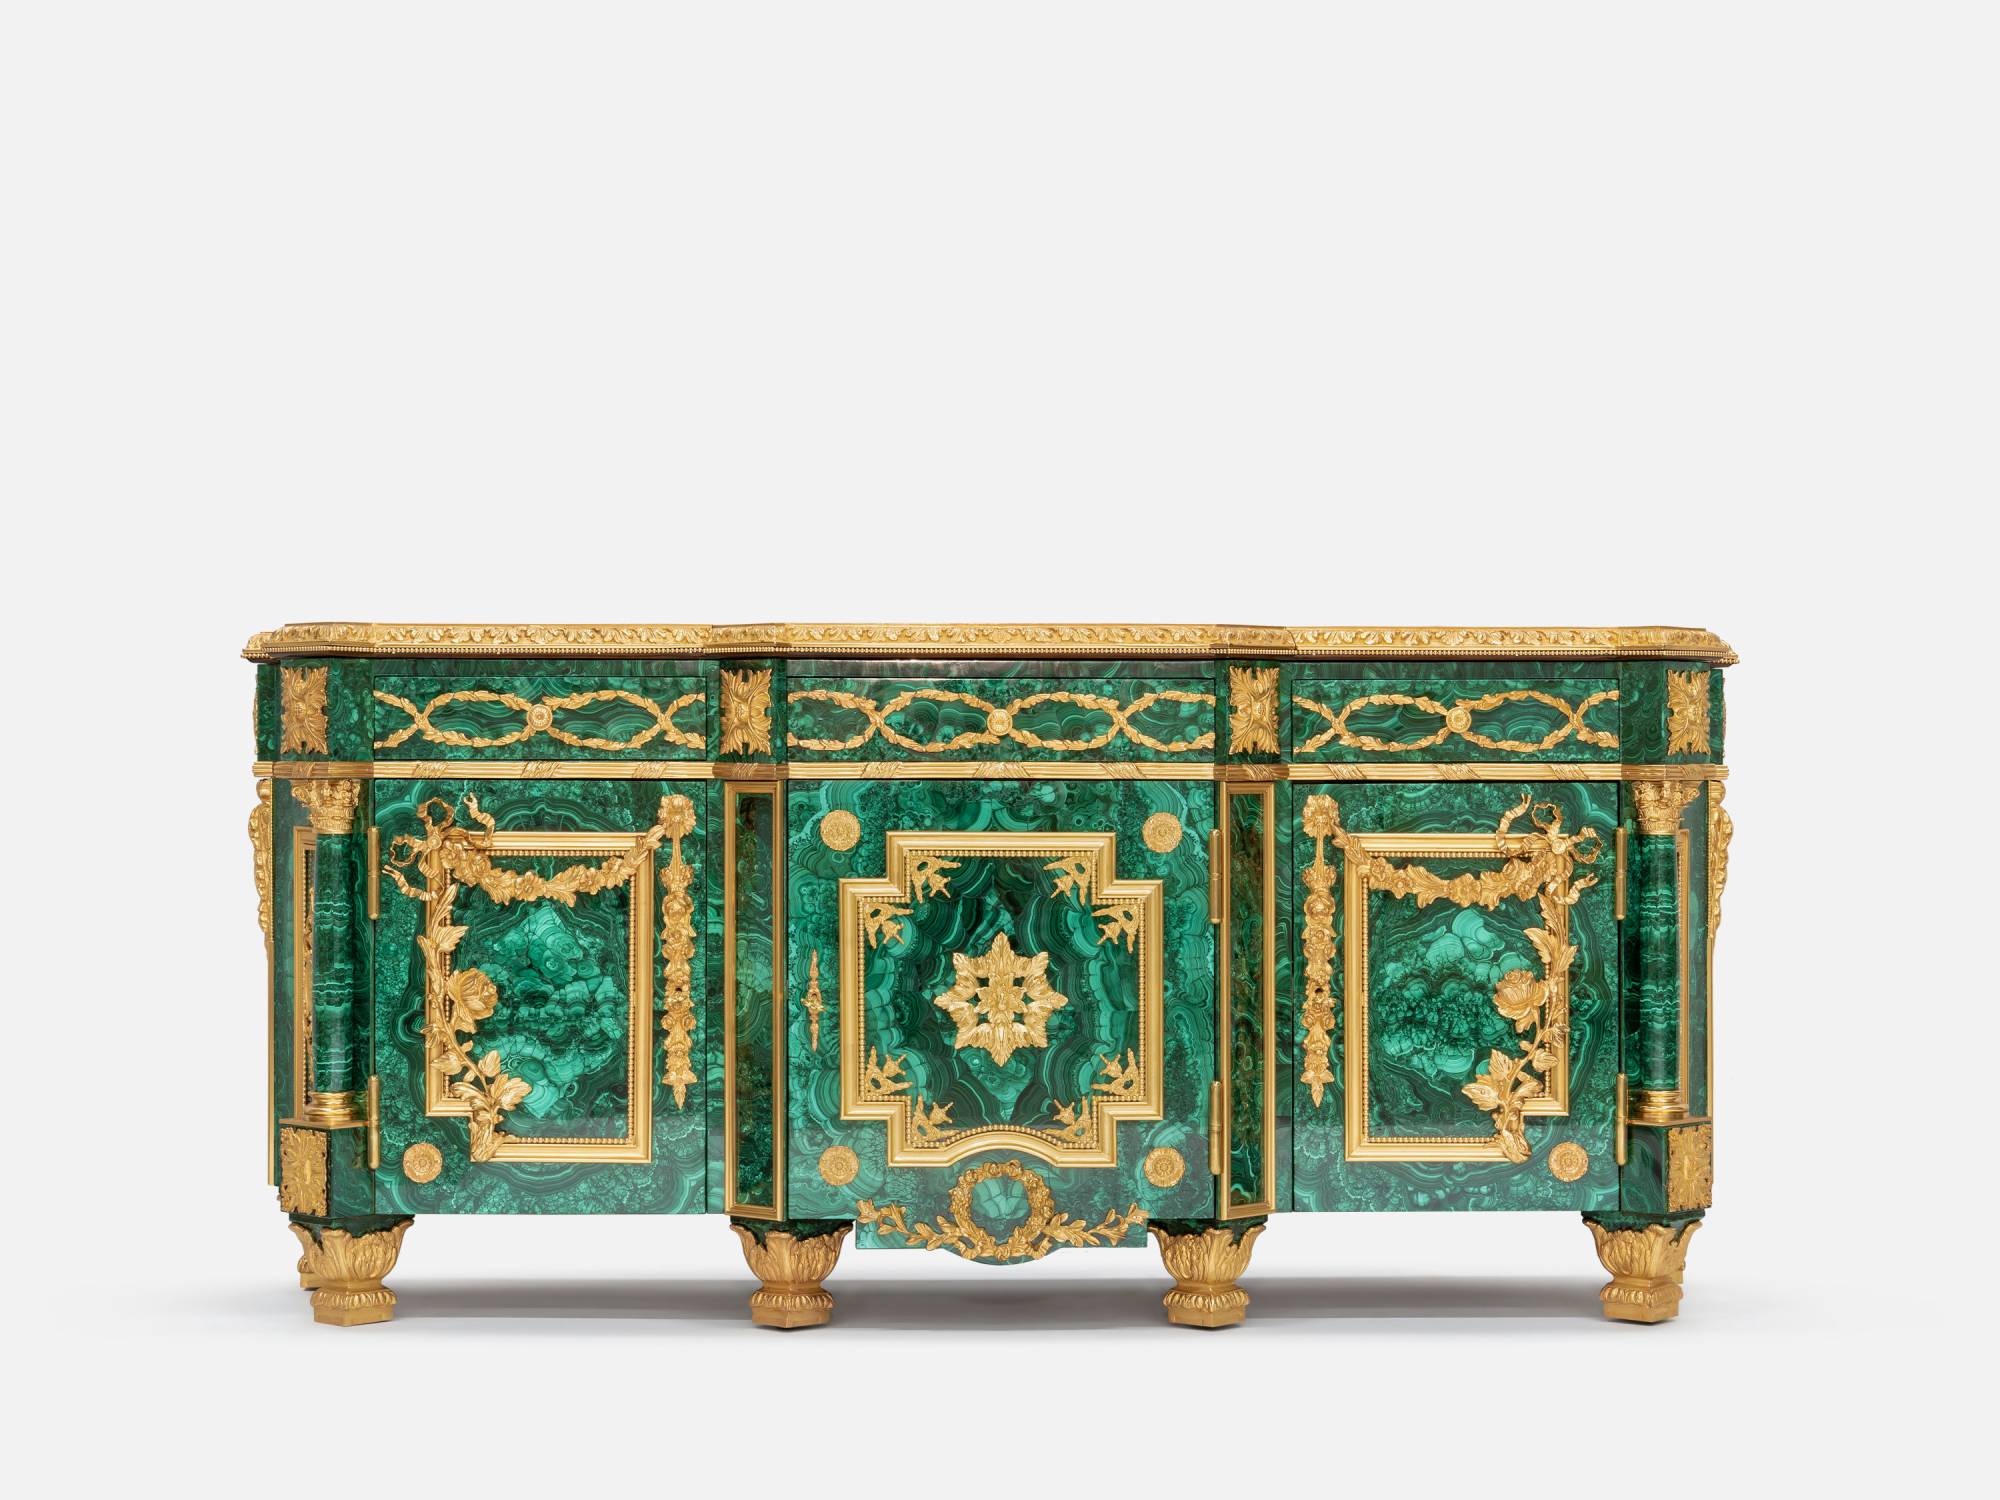 ART. 2334 – Discover the elegance of luxury classic Sideboards made in Italy by C.G. Capelletti. Luxury classic furniture that combines style and craftsmanship.